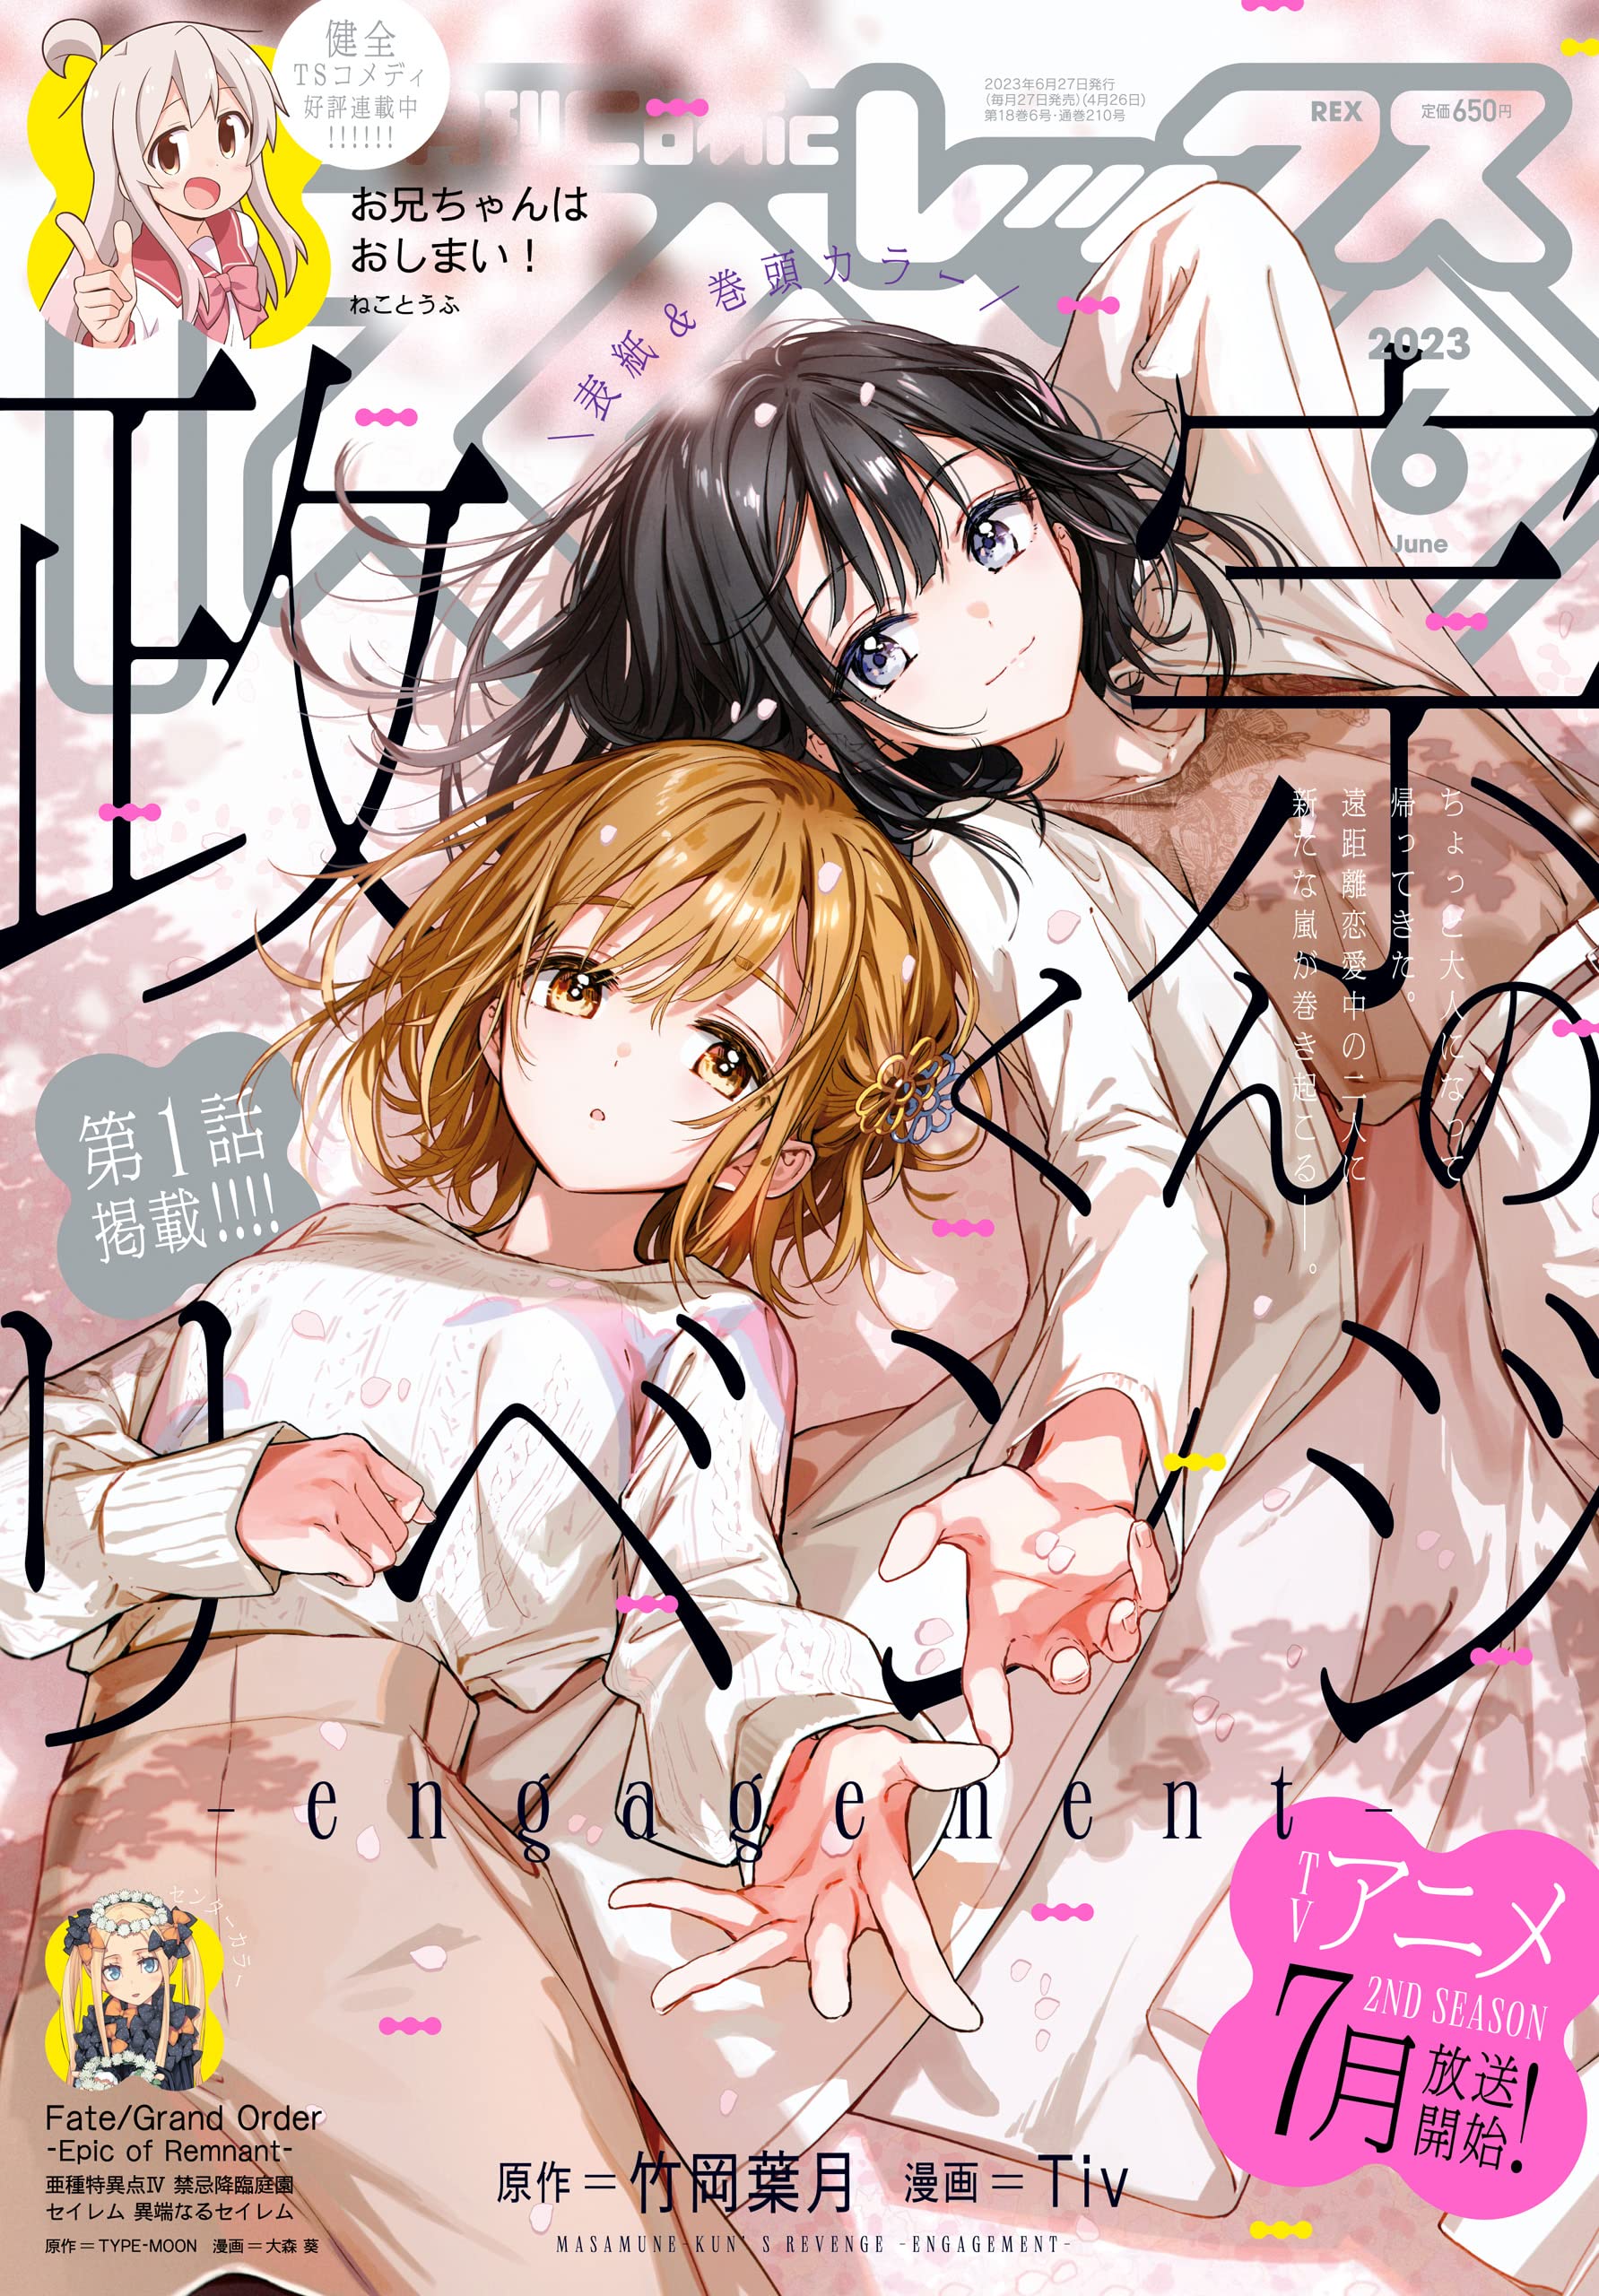 art] Skip to Loafer by Misaki Takamatsu is on cover of the upcoming  Afternoon issue 6/2023. : r/manga